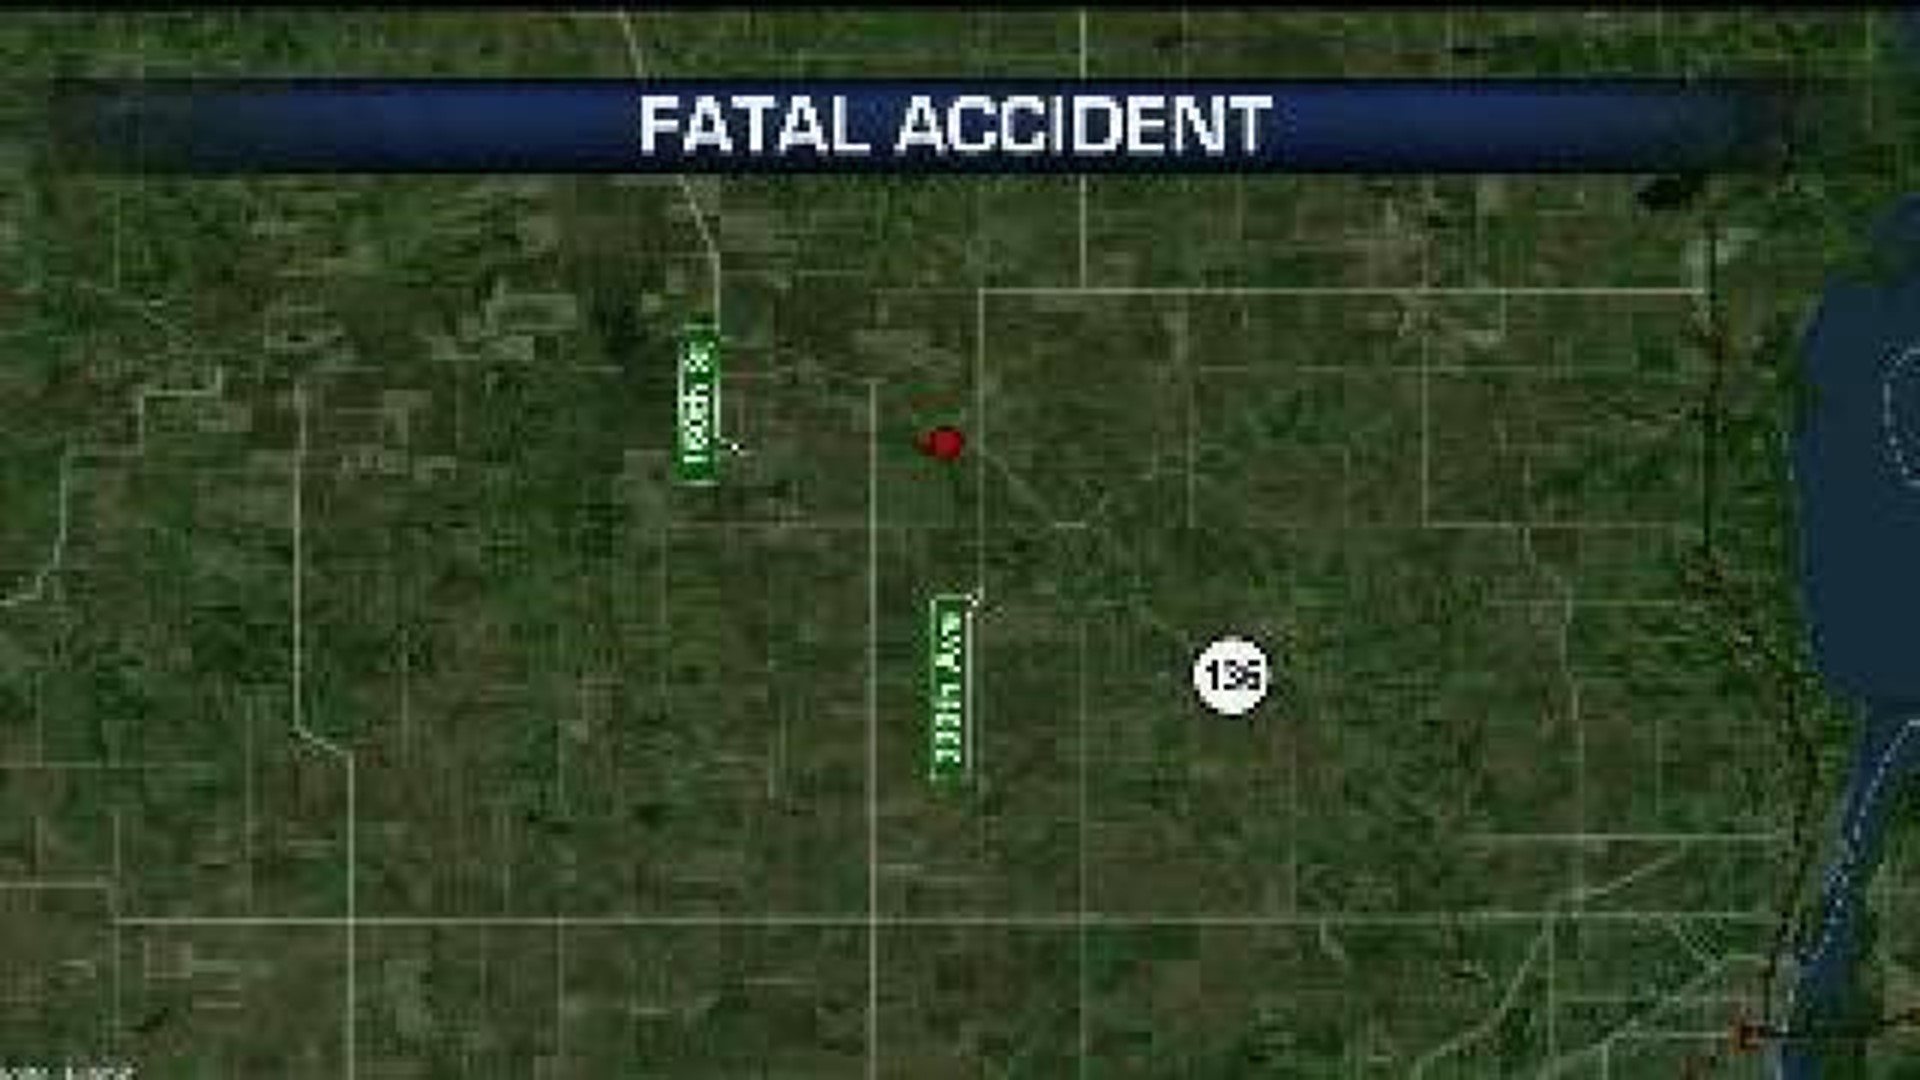 Motorcyclist Killed in Accident